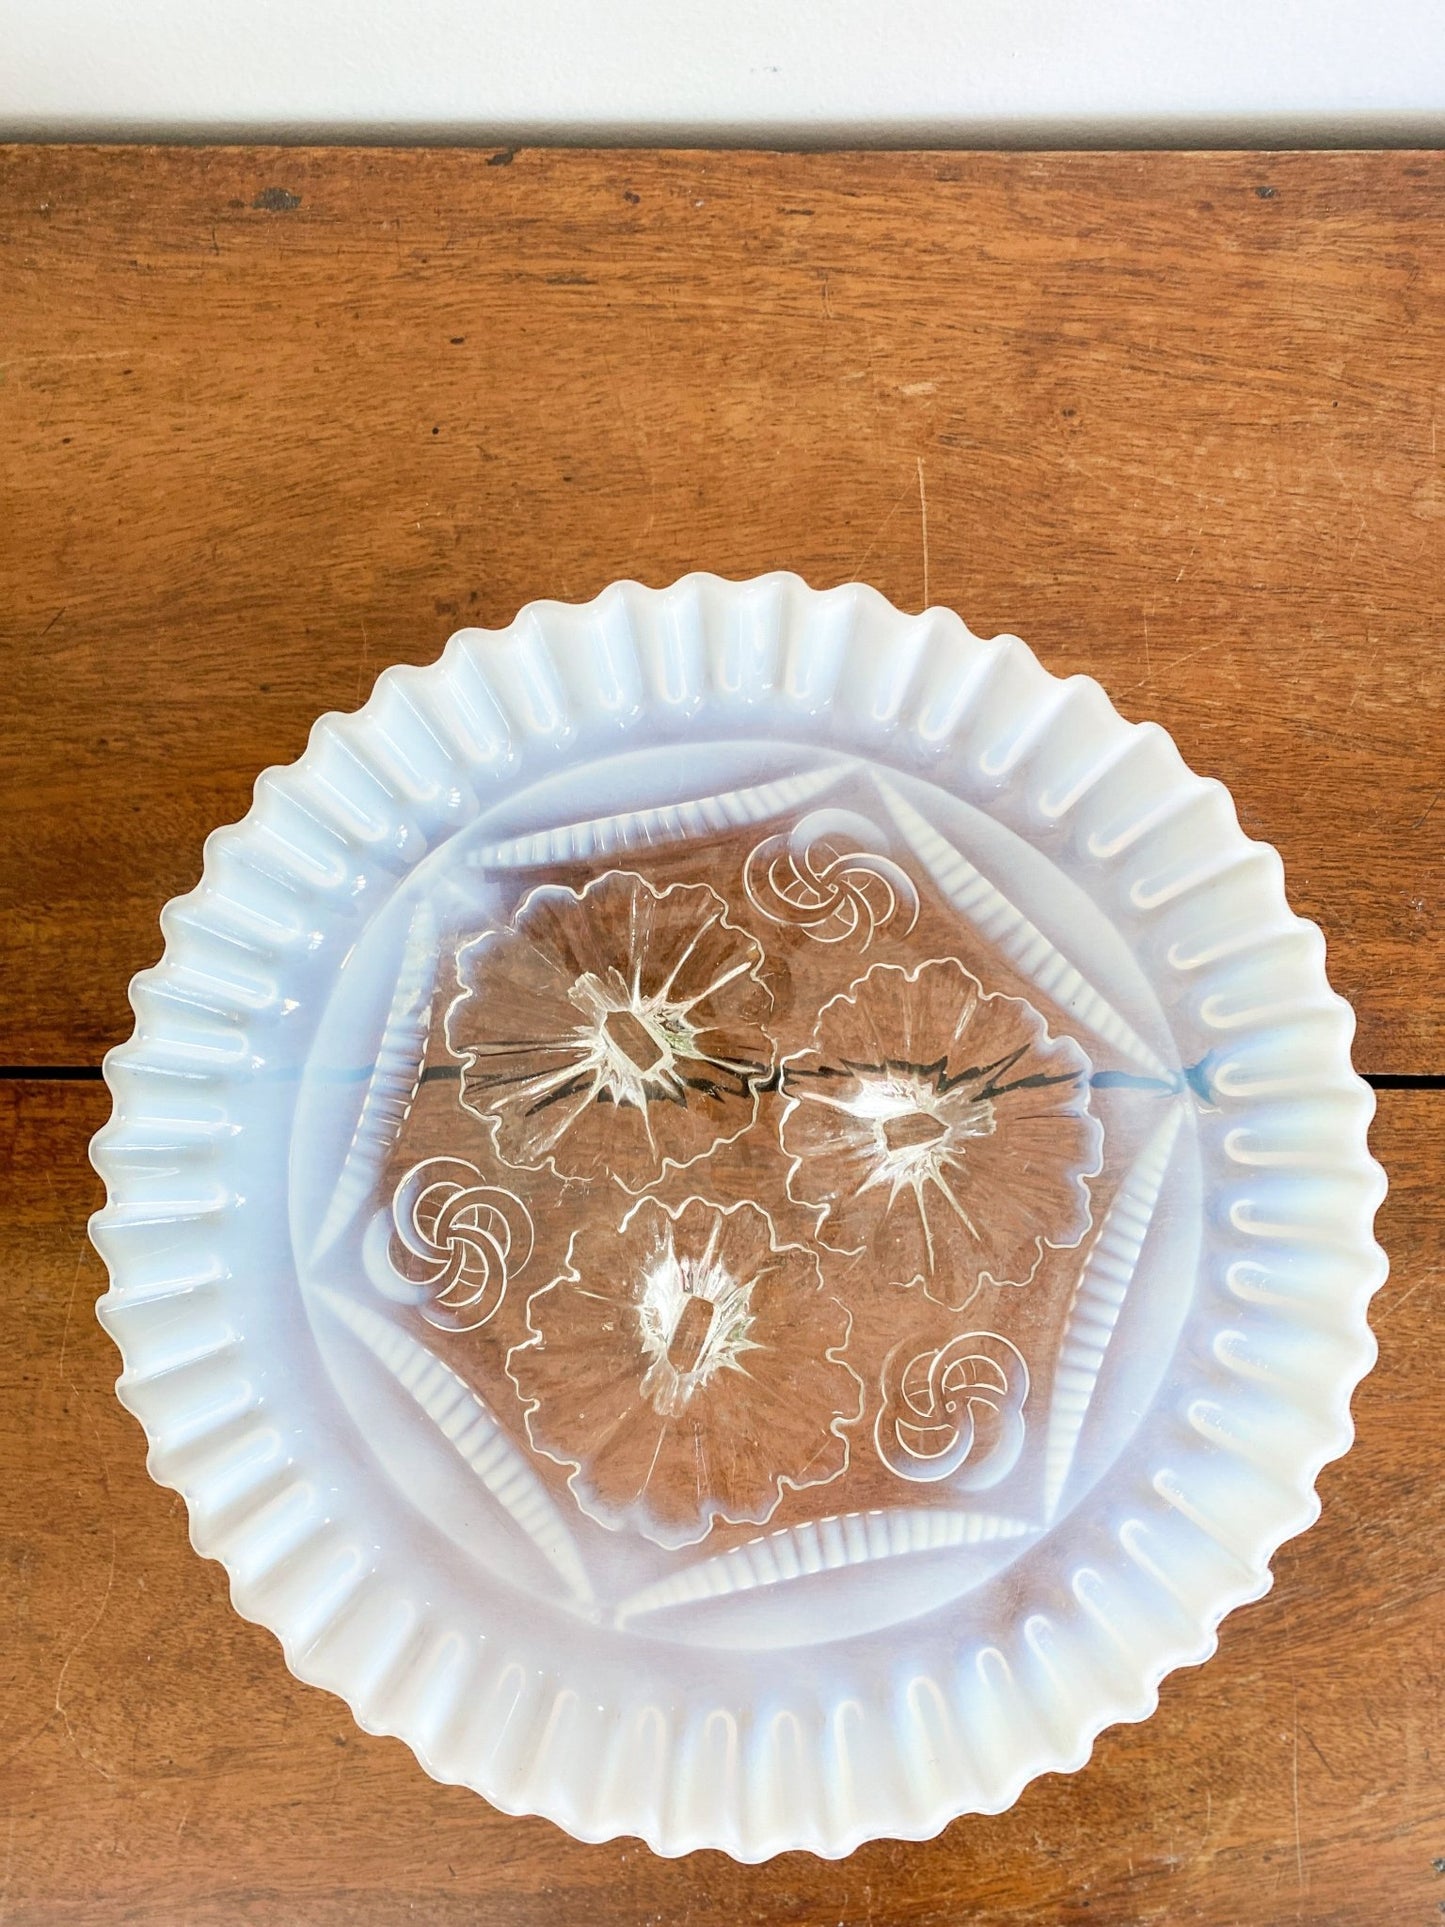 Antique Northwood Ruffles & Rings Opalescent Bowl - Perth Market